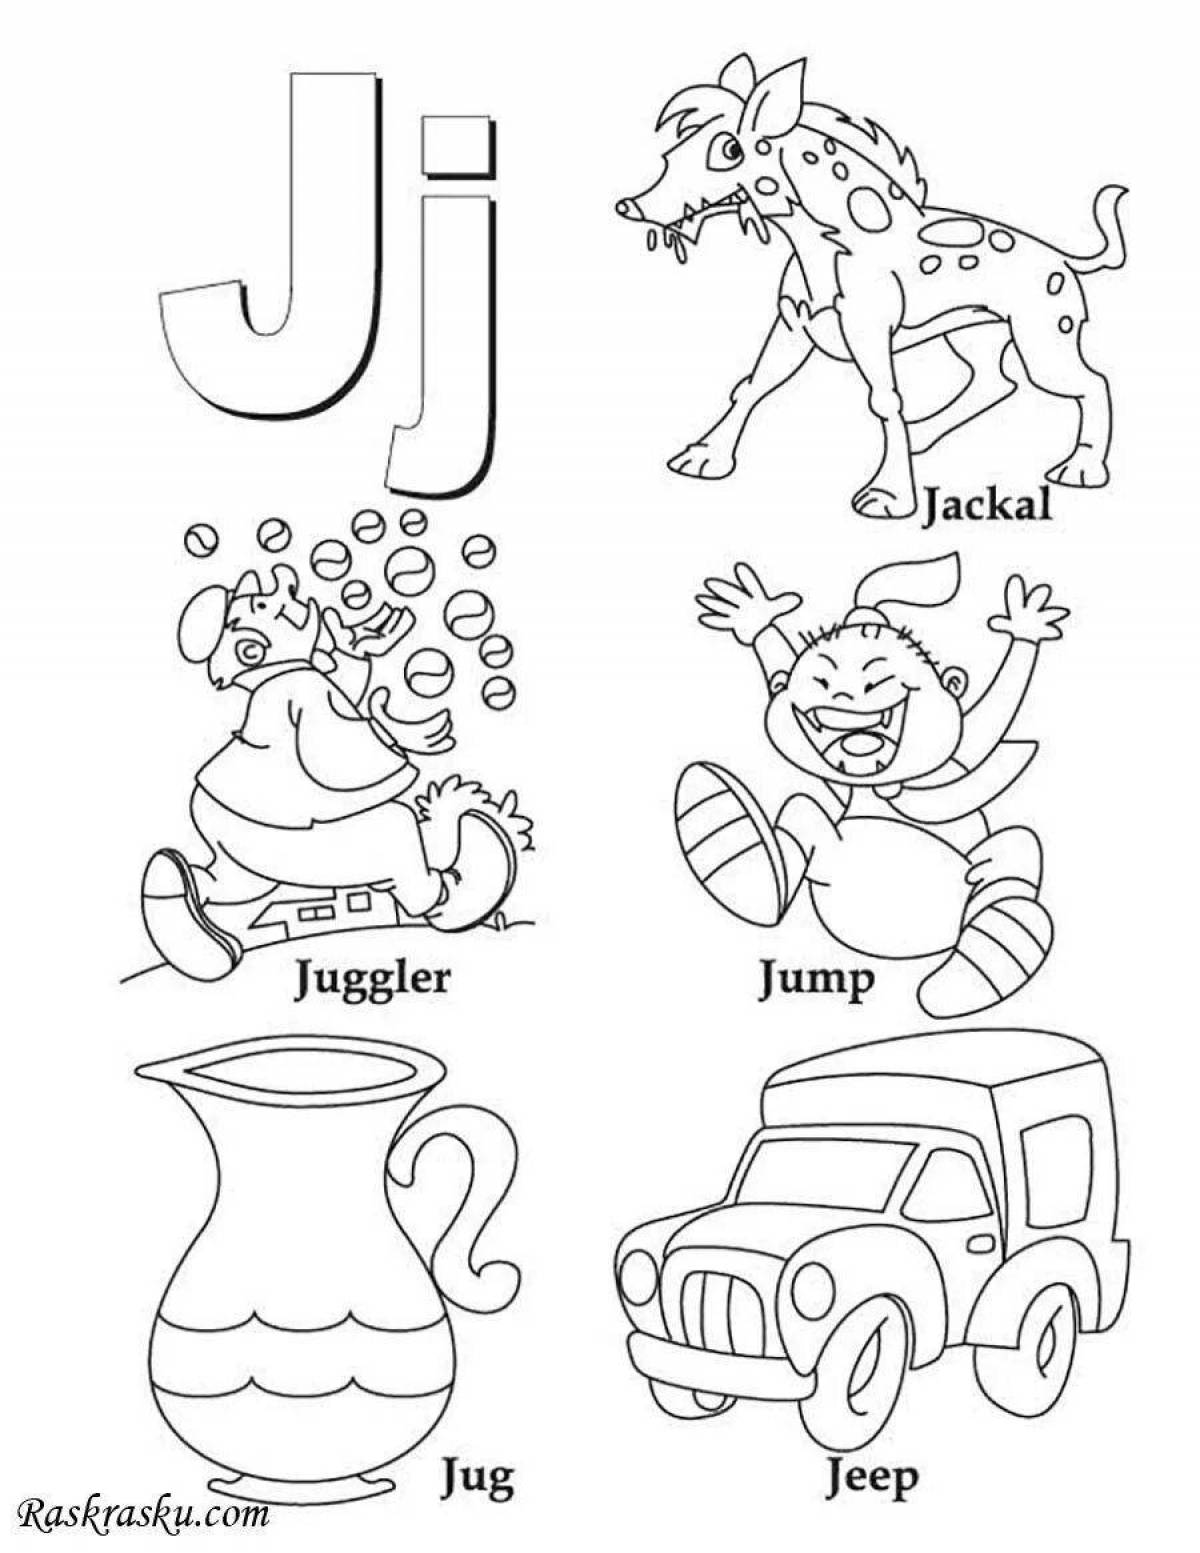 Coloring book funny letter j